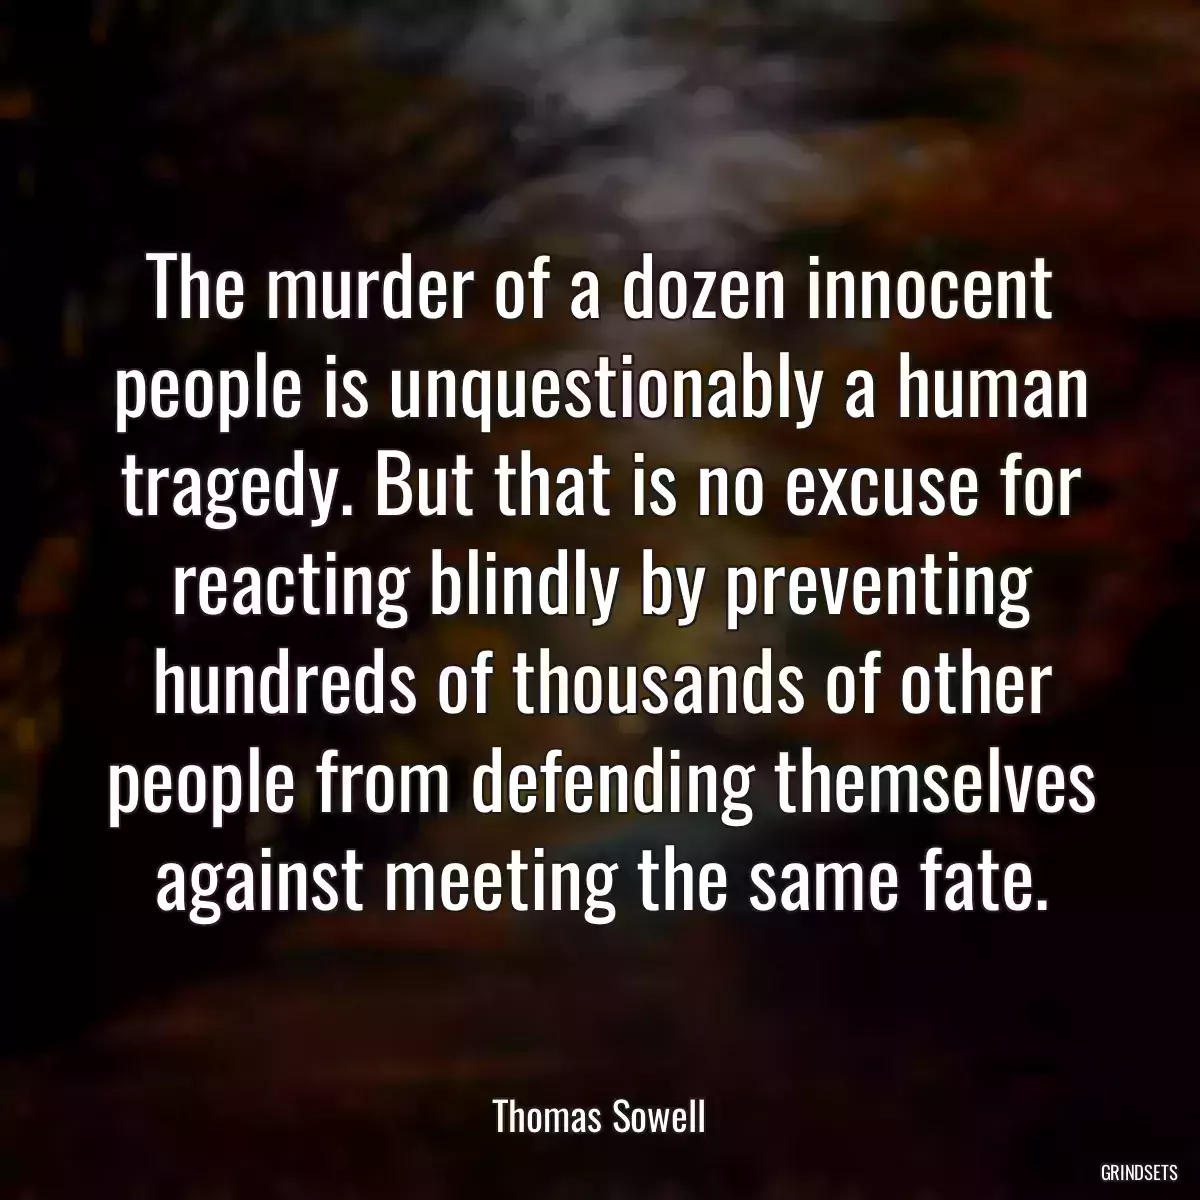 The murder of a dozen innocent people is unquestionably a human tragedy. But that is no excuse for reacting blindly by preventing hundreds of thousands of other people from defending themselves against meeting the same fate.